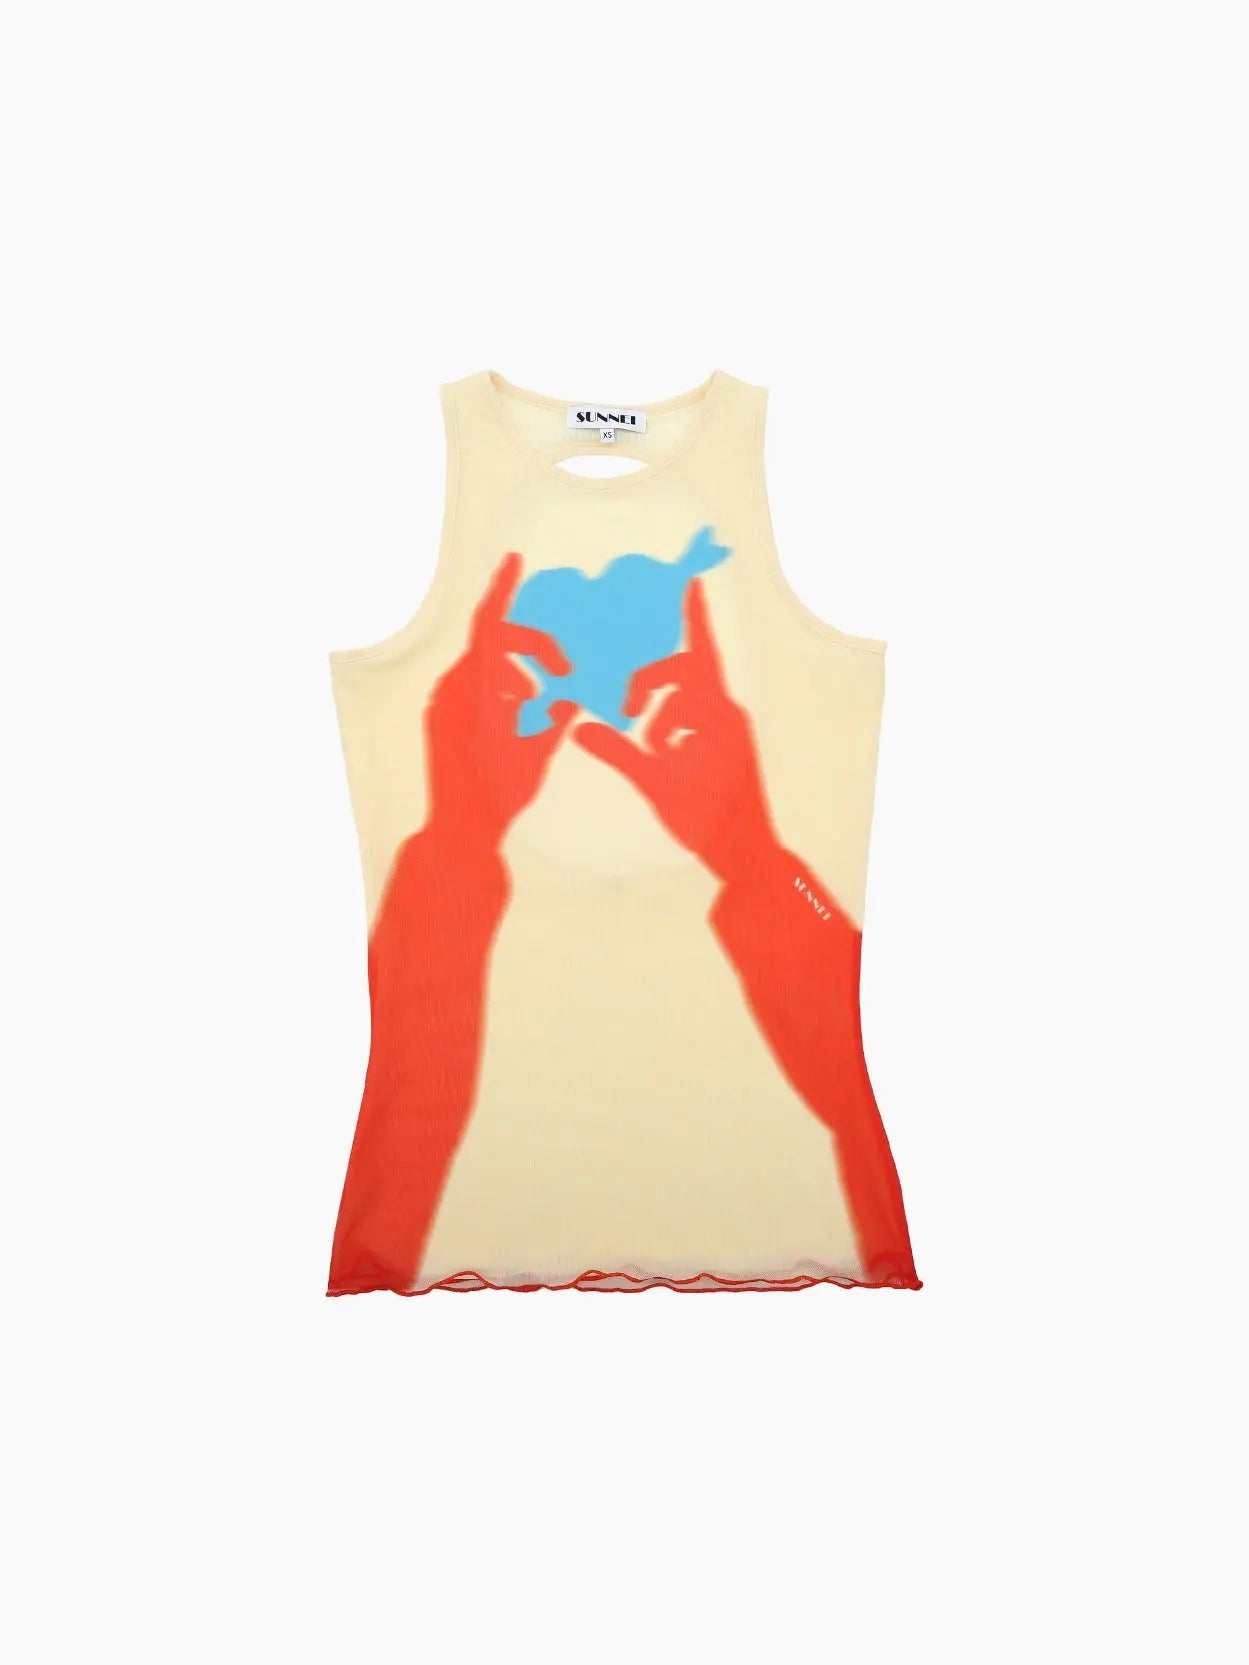 A beige sleeveless top with a printed design of red hands creating a bird shadow puppet, featuring a blue silhouette of the bird in the center. The top has a round neckline and a slightly wavy hem, perfect for adding an artistic touch from Barcelona's Bassal store to your wardrobe. This is the Buco Tulle Top Lye Light Yellow by Sunnei.